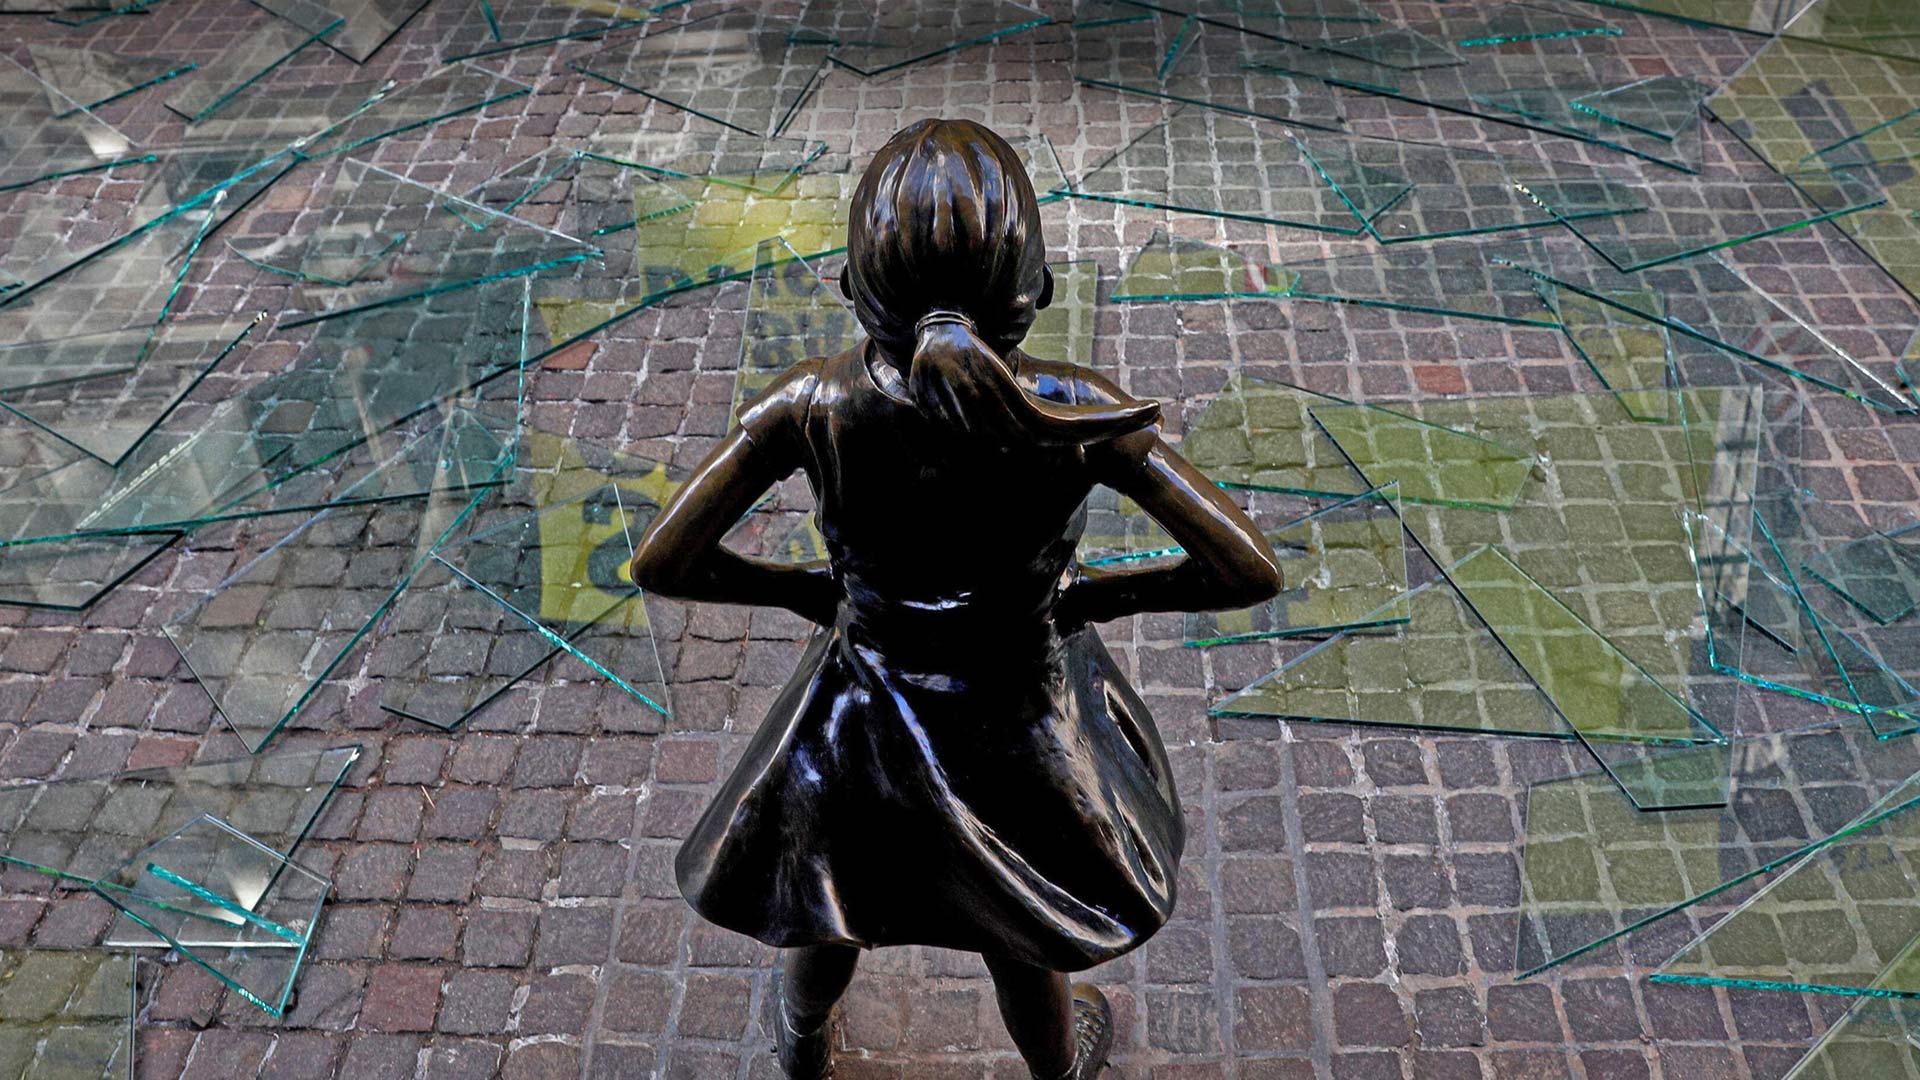 The 'Fearless Girl' statue outside the New York Stock Exchange in New York City - Brendan McDermid/Alamy)